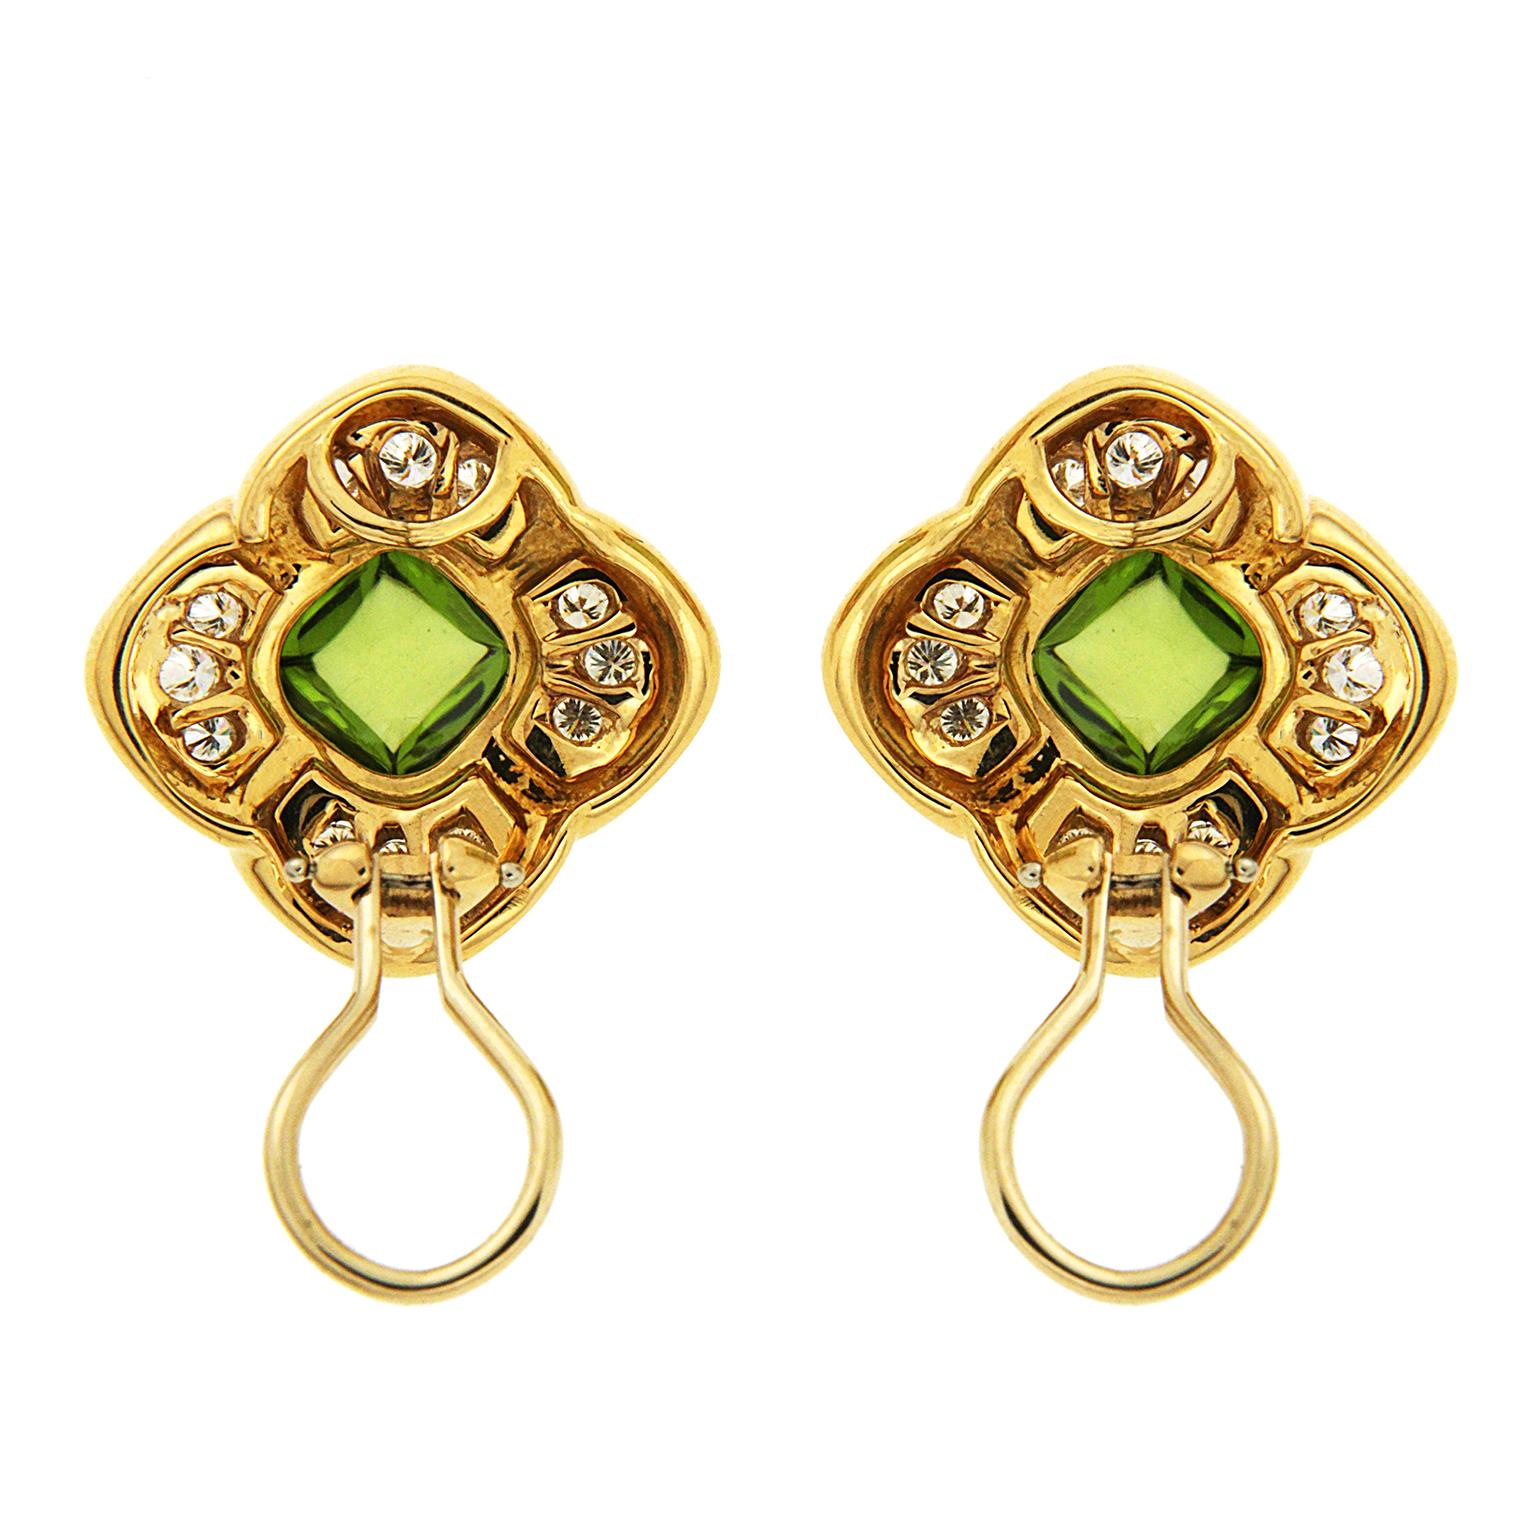 These earrings are made in 18kt yellow gold with cushion cabochon / sugar loaf peridots in the center and 1.20 carat total weight of round brilliant diamonds finished with clip backs.